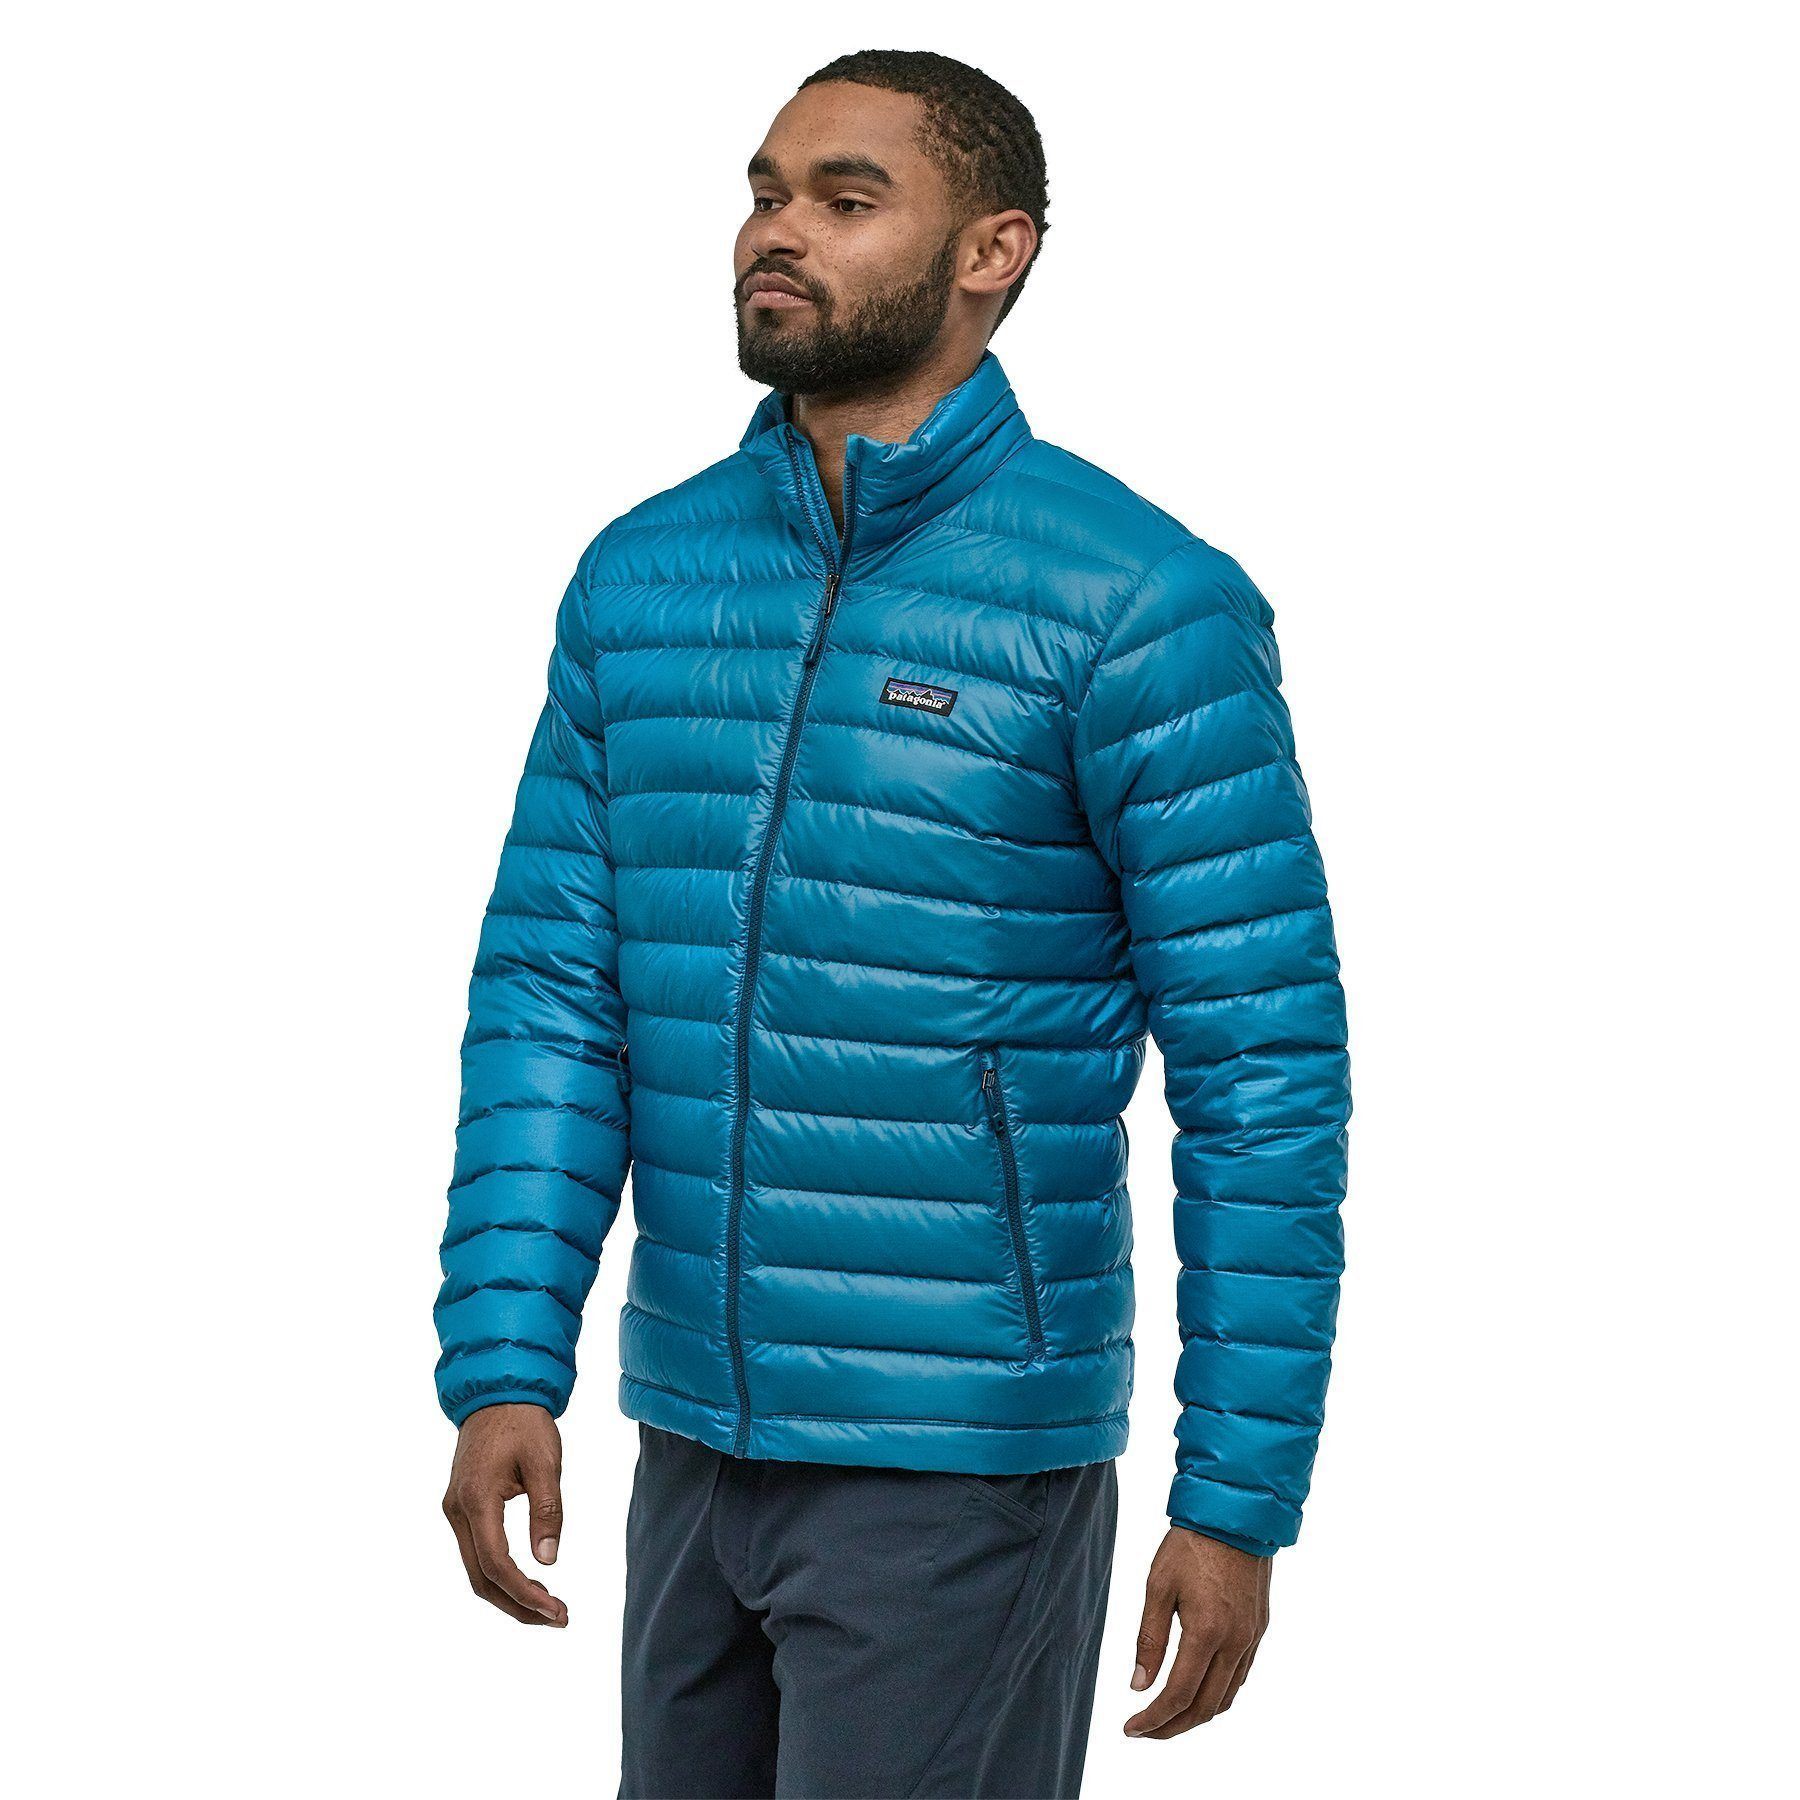 Patagonia Men's Down Sweater Jacket - Ethical down/Recycled polyester, Balkan Blue / S